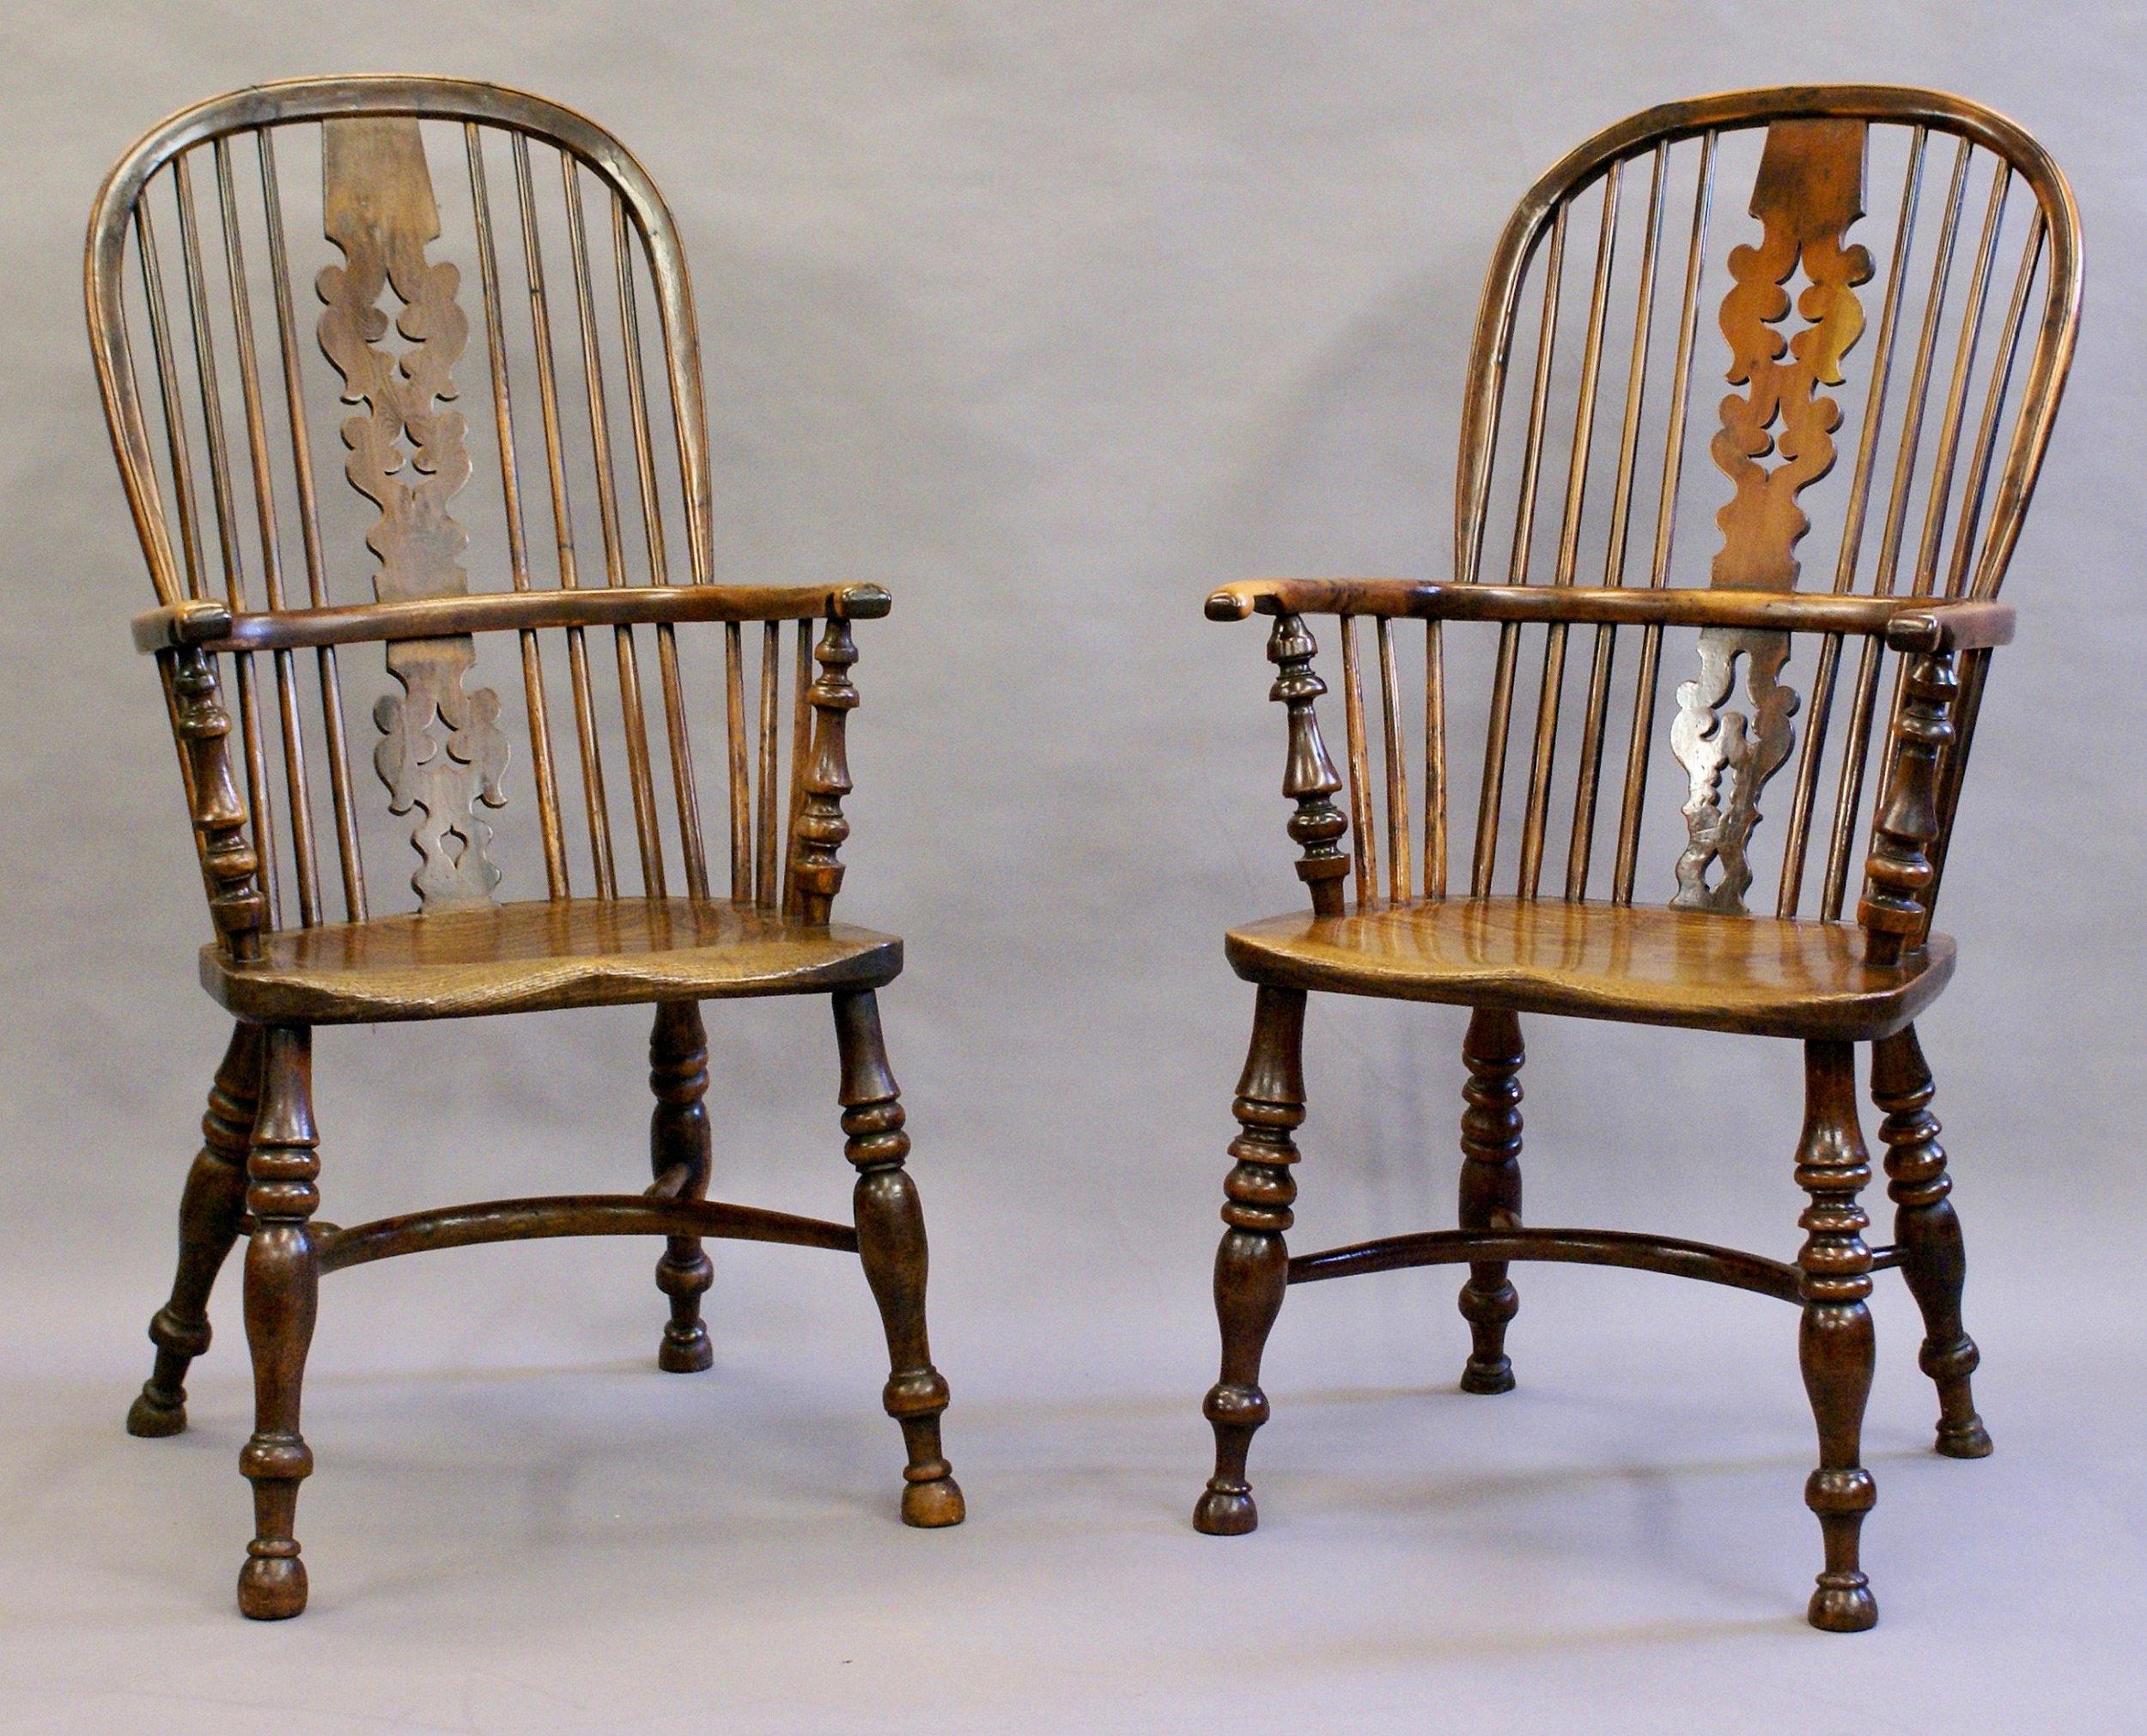 Matched Pair of Yew Wood Arm Chairs For Sale 1